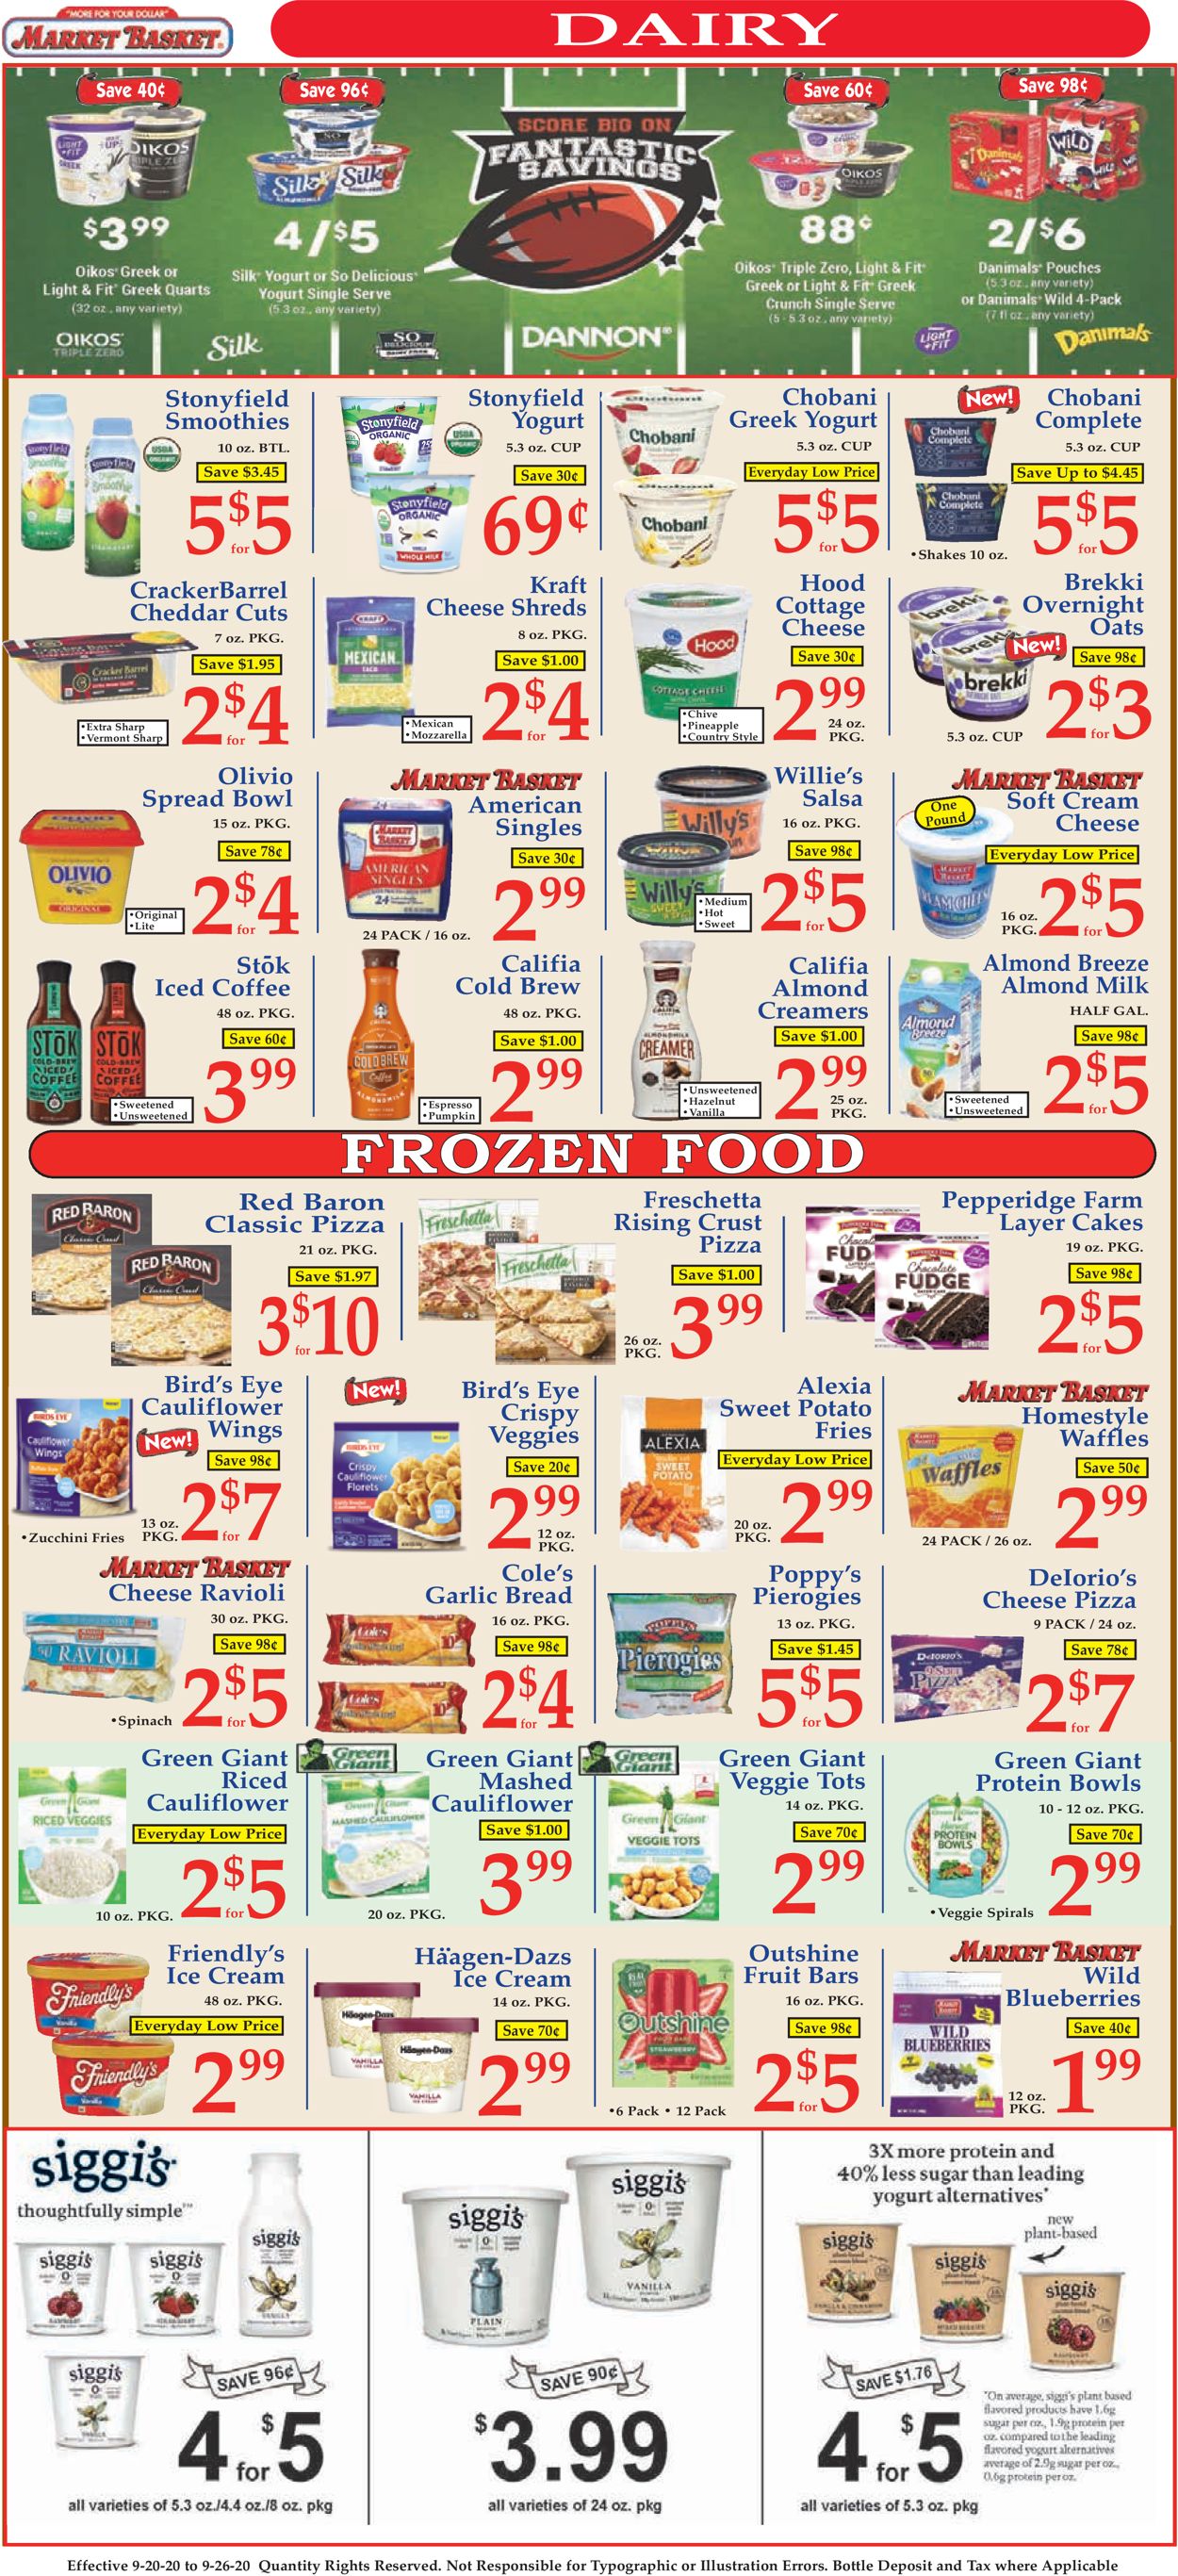 Market Basket Current weekly ad 09/20 - 09/26/2020 [6] - frequent-ads.com